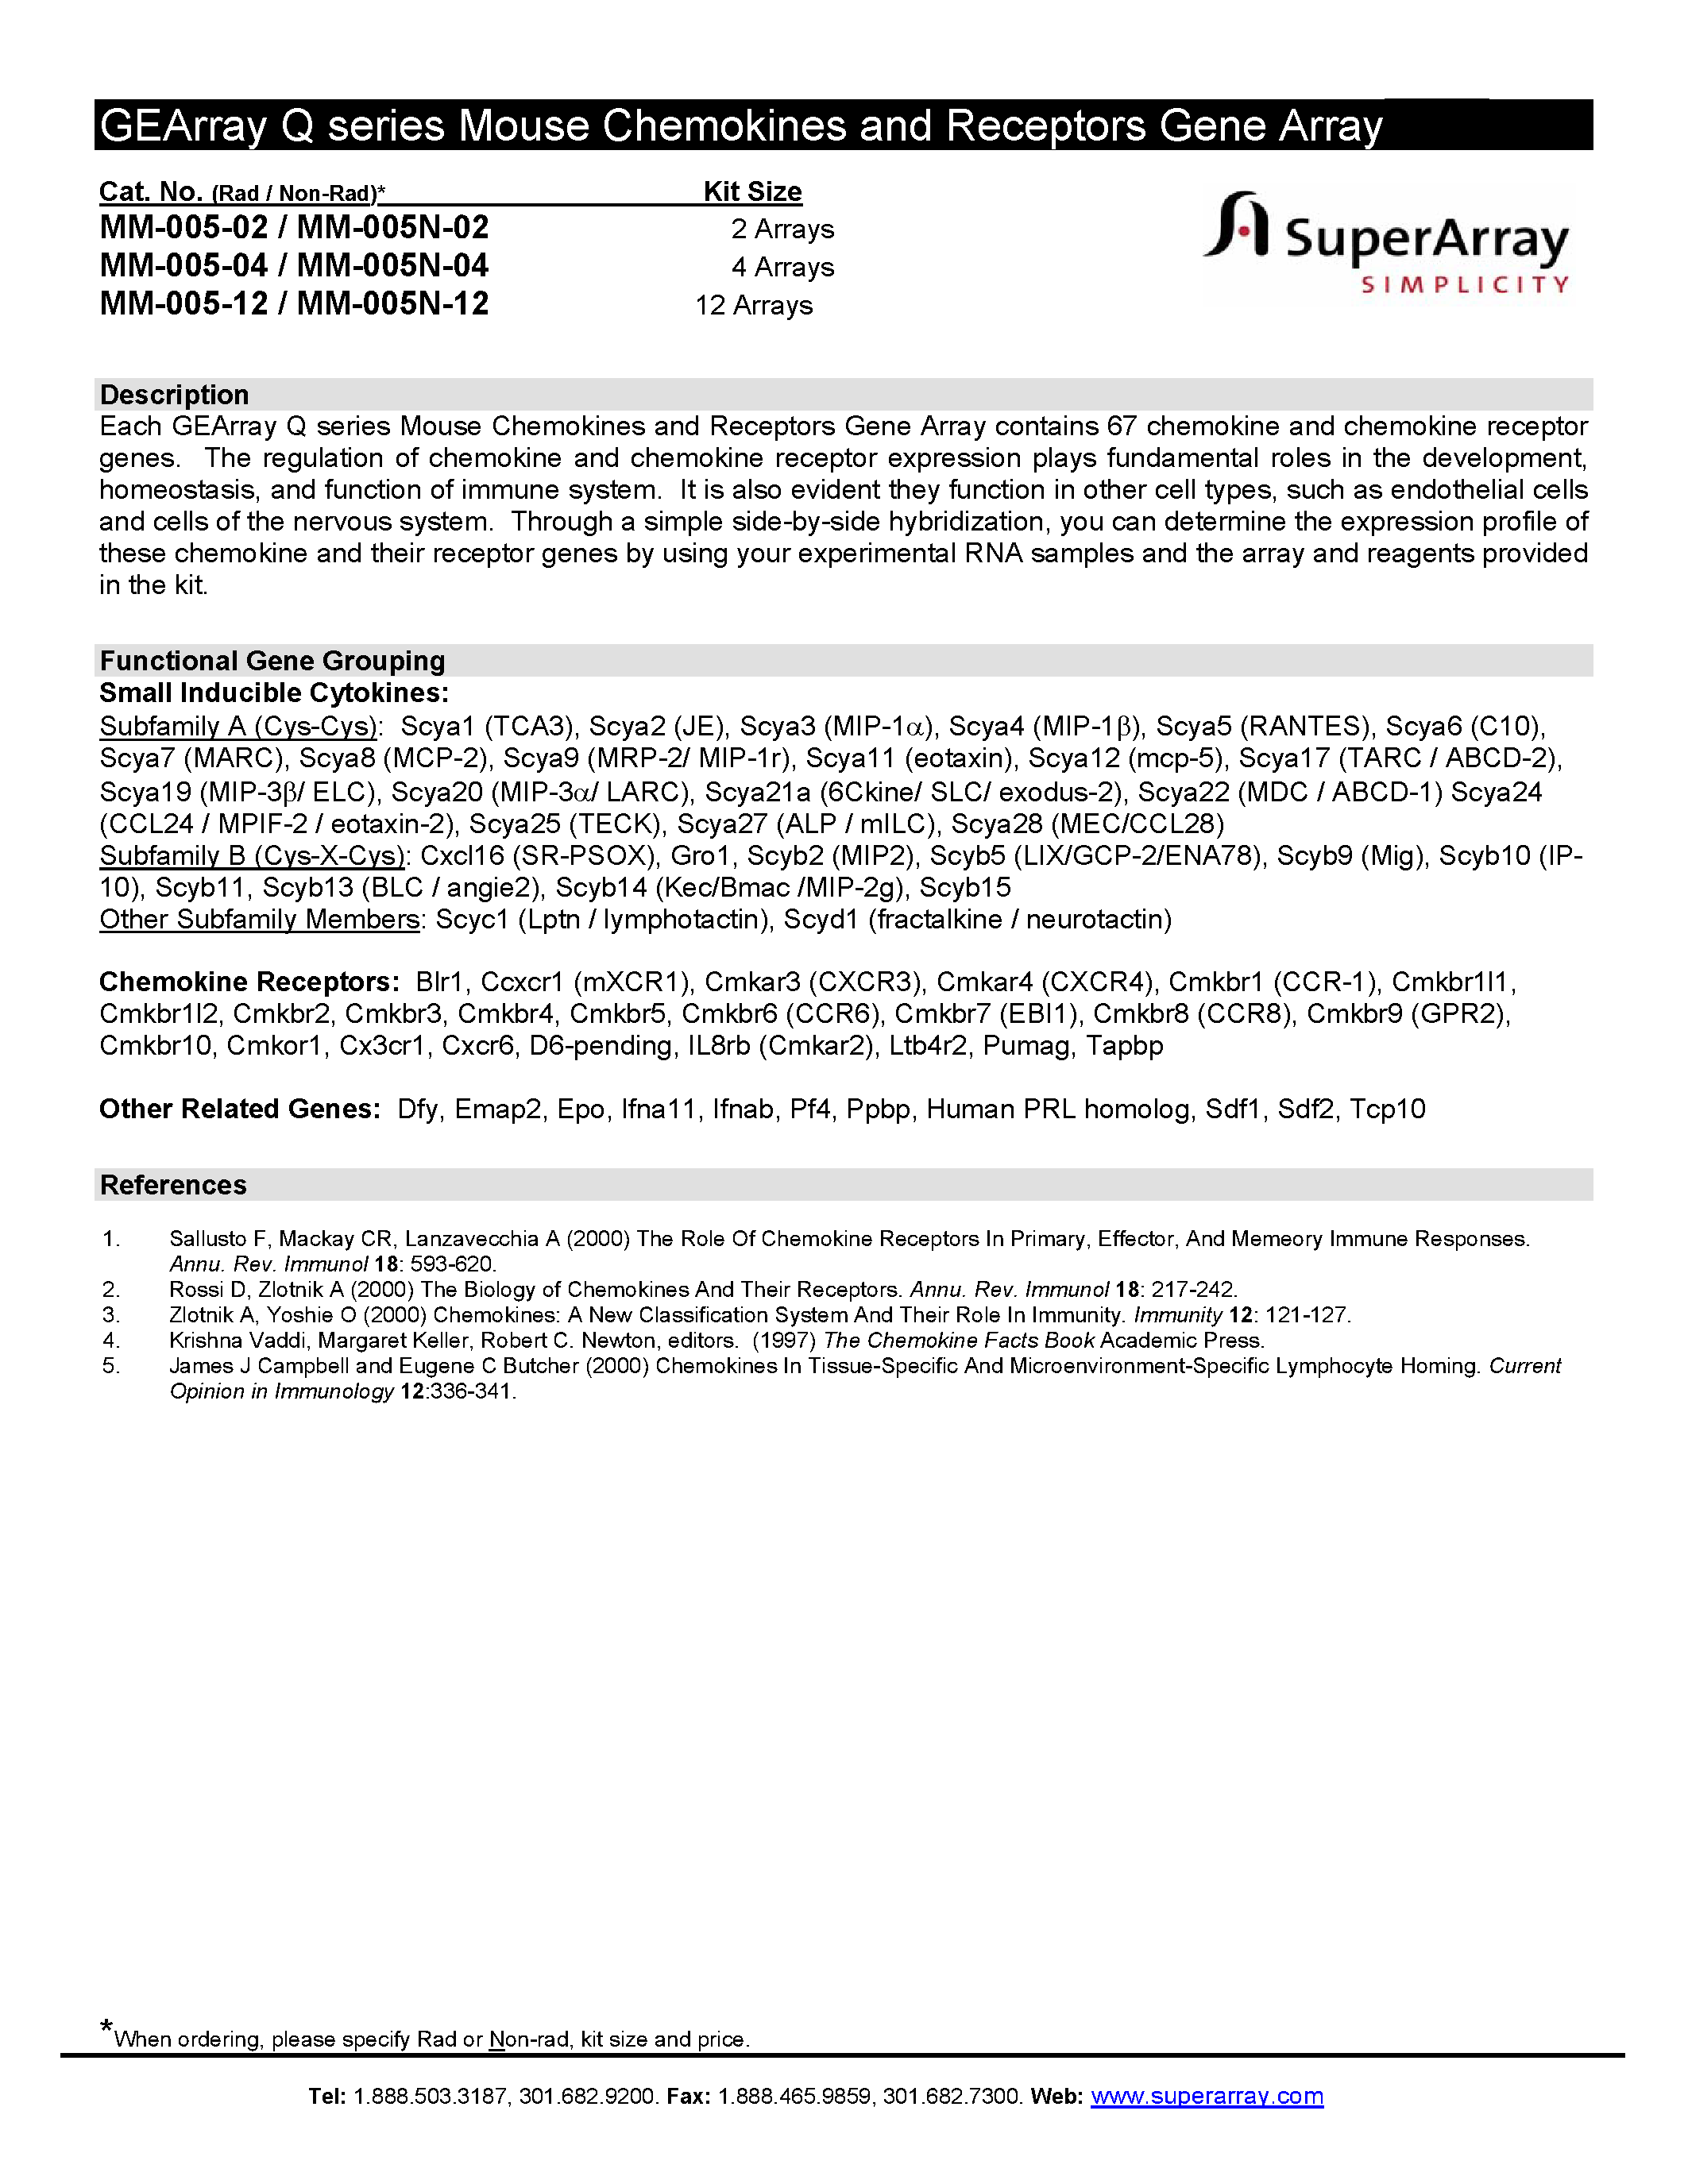 Datasheet MM-005-12 - GEArray Q series Mouse Chemokines and Receptors Gene Array page 1